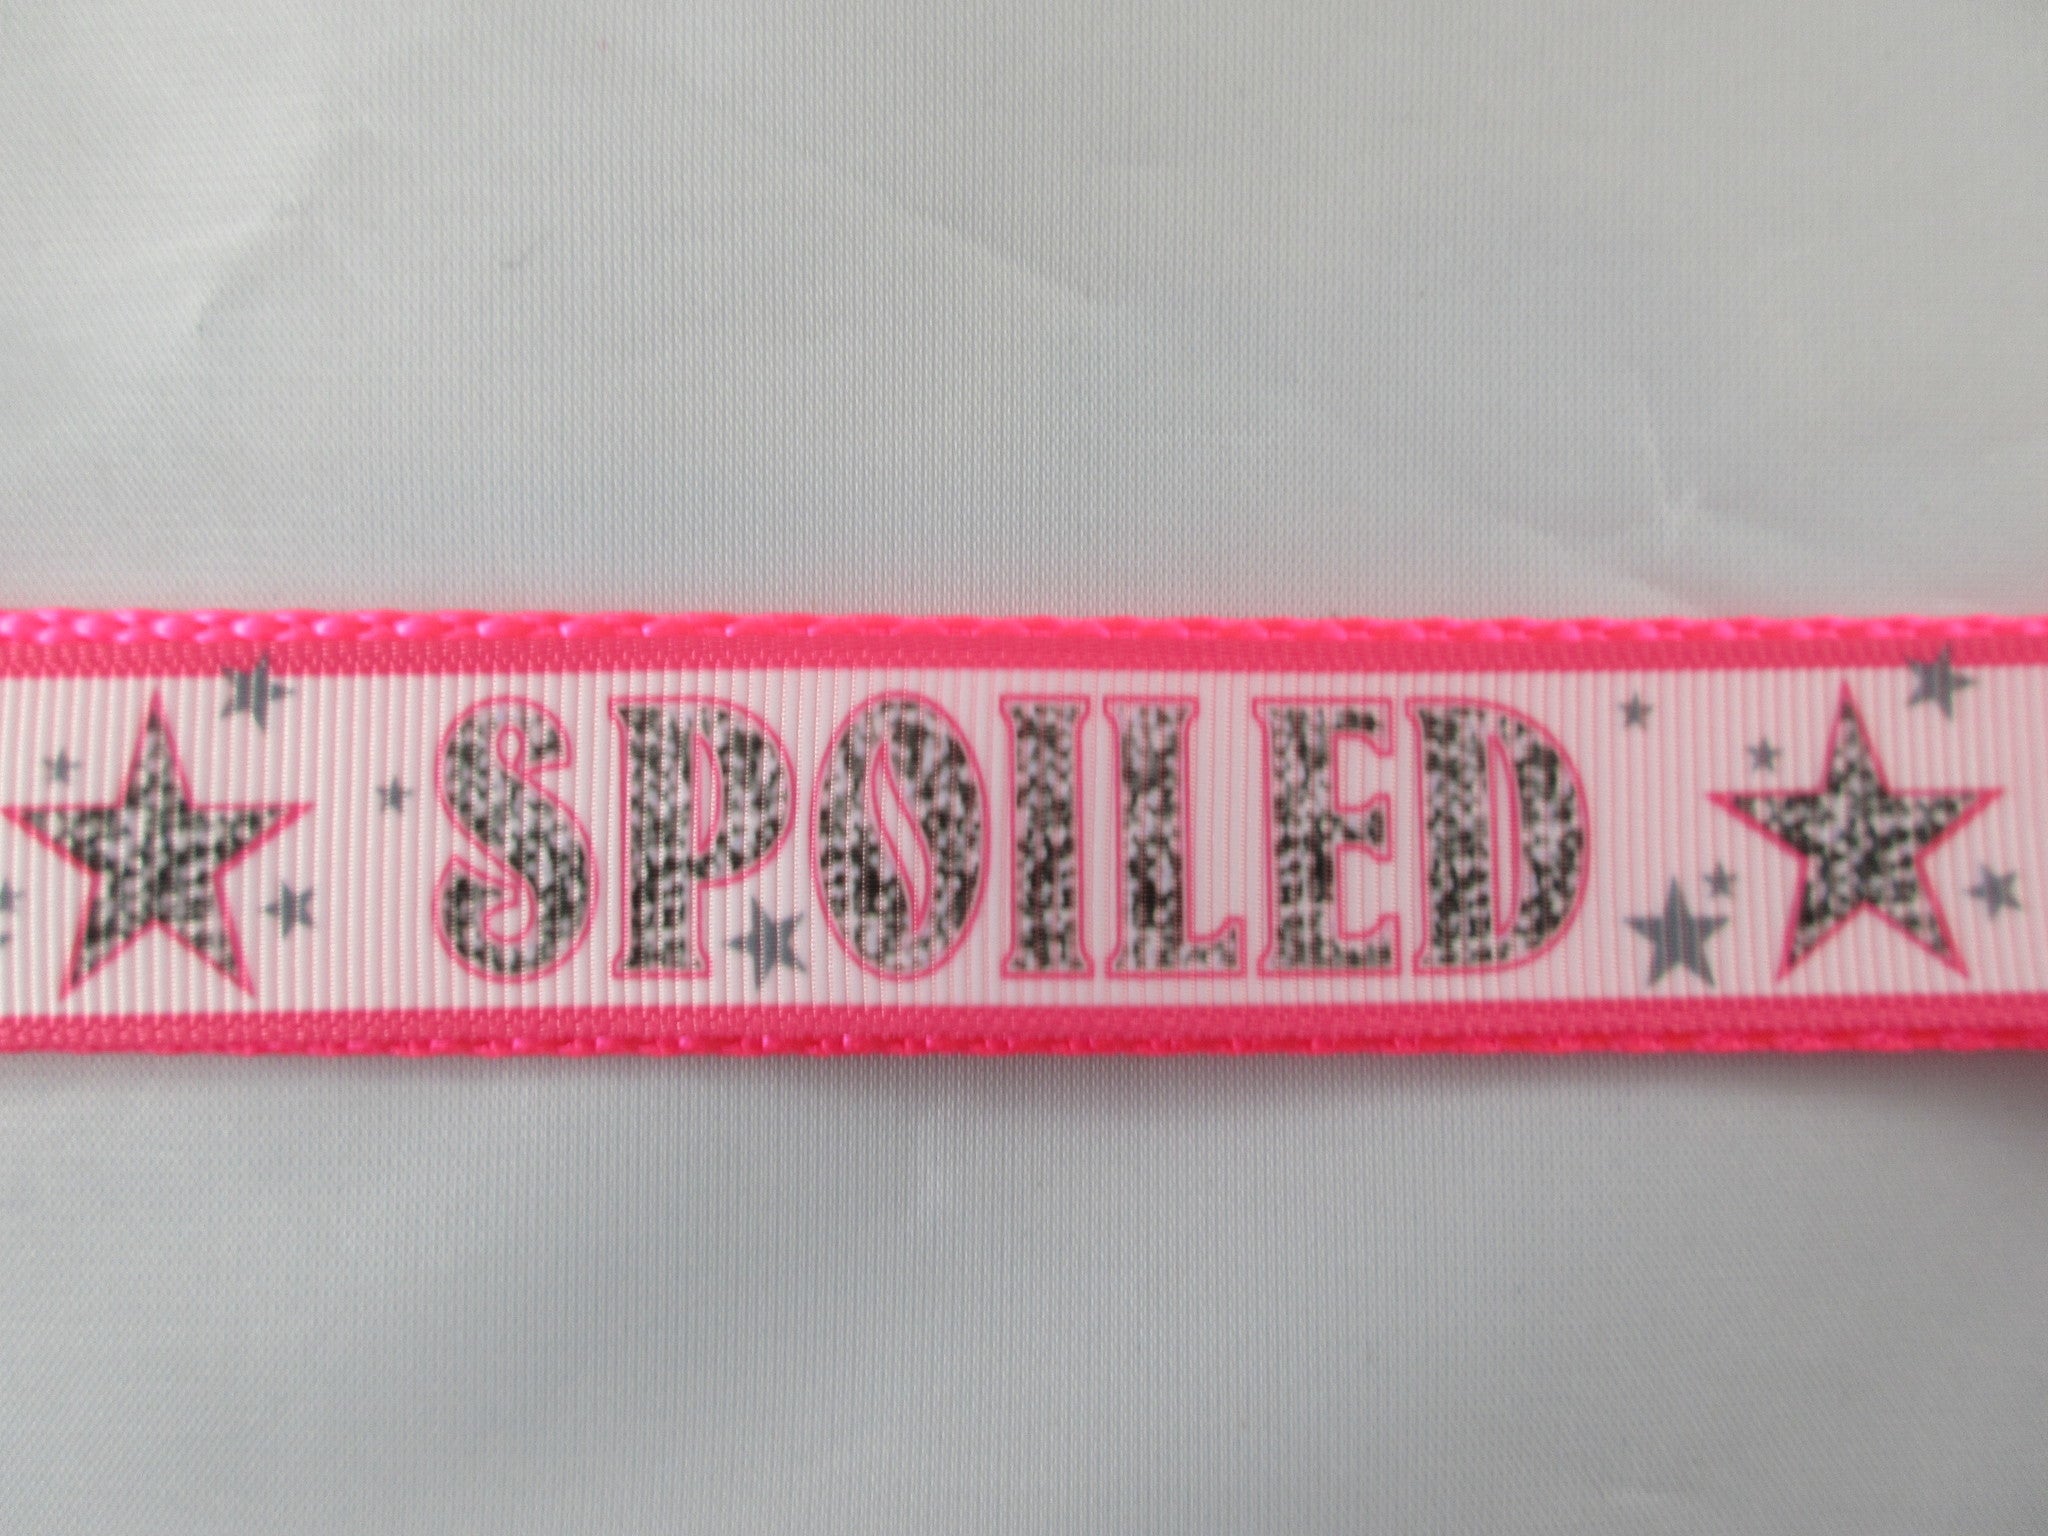 1" Pink Spoiled Dog Collar - Penny and Hoover's Pig Pen